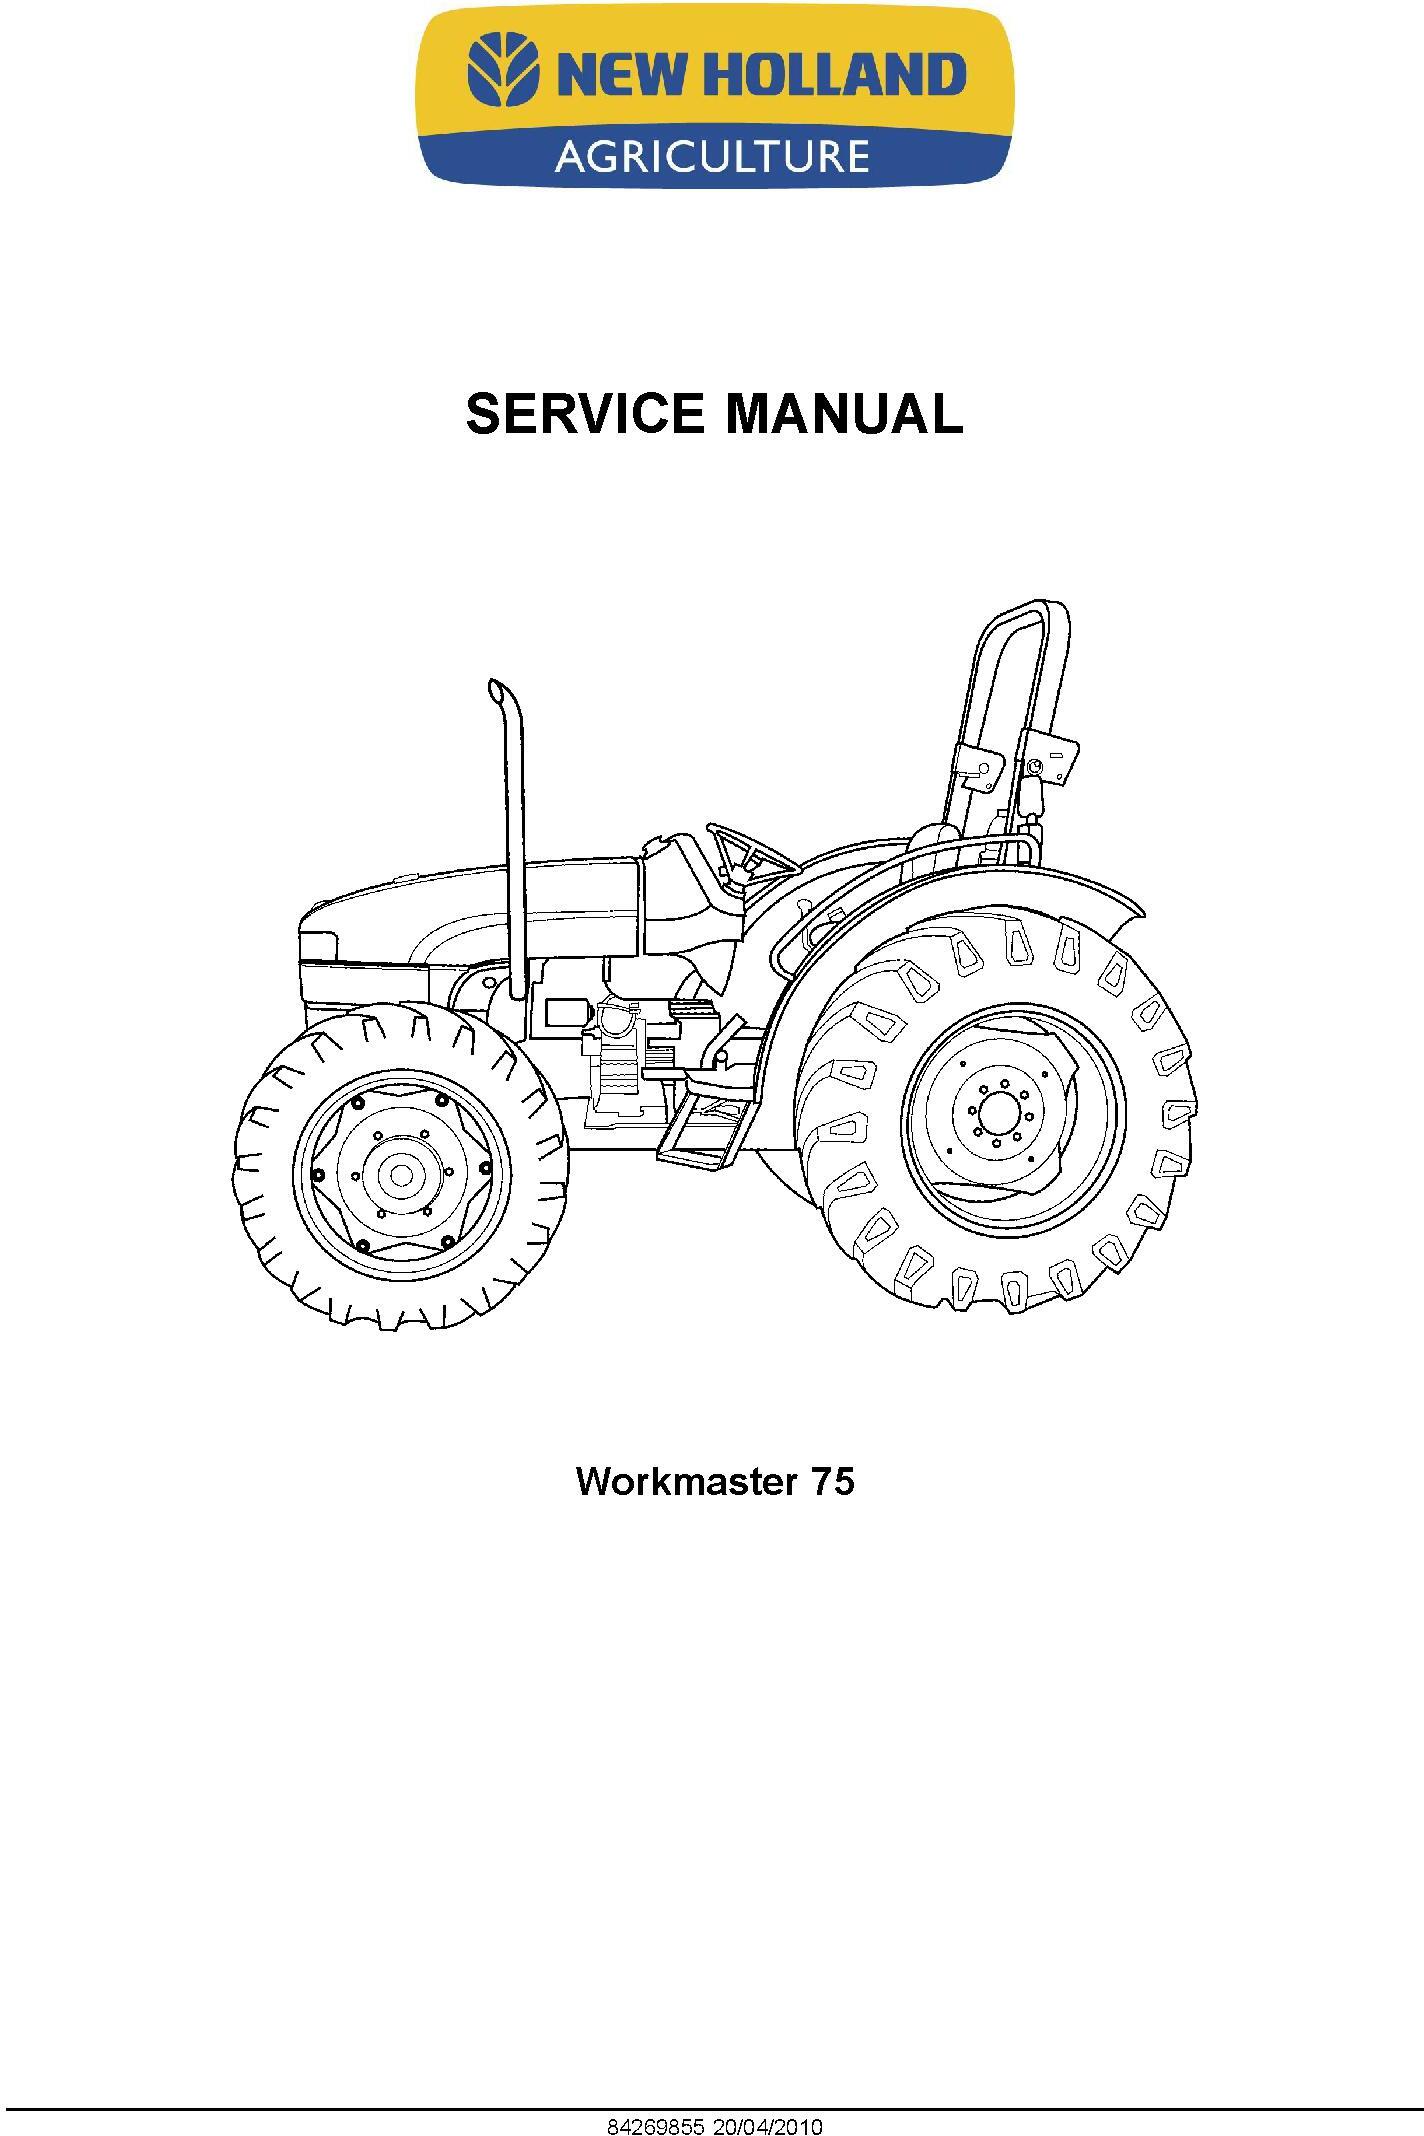 New Holland Workmaster 75, Workmaster 65 Tractor Complete Service Manual - 19562